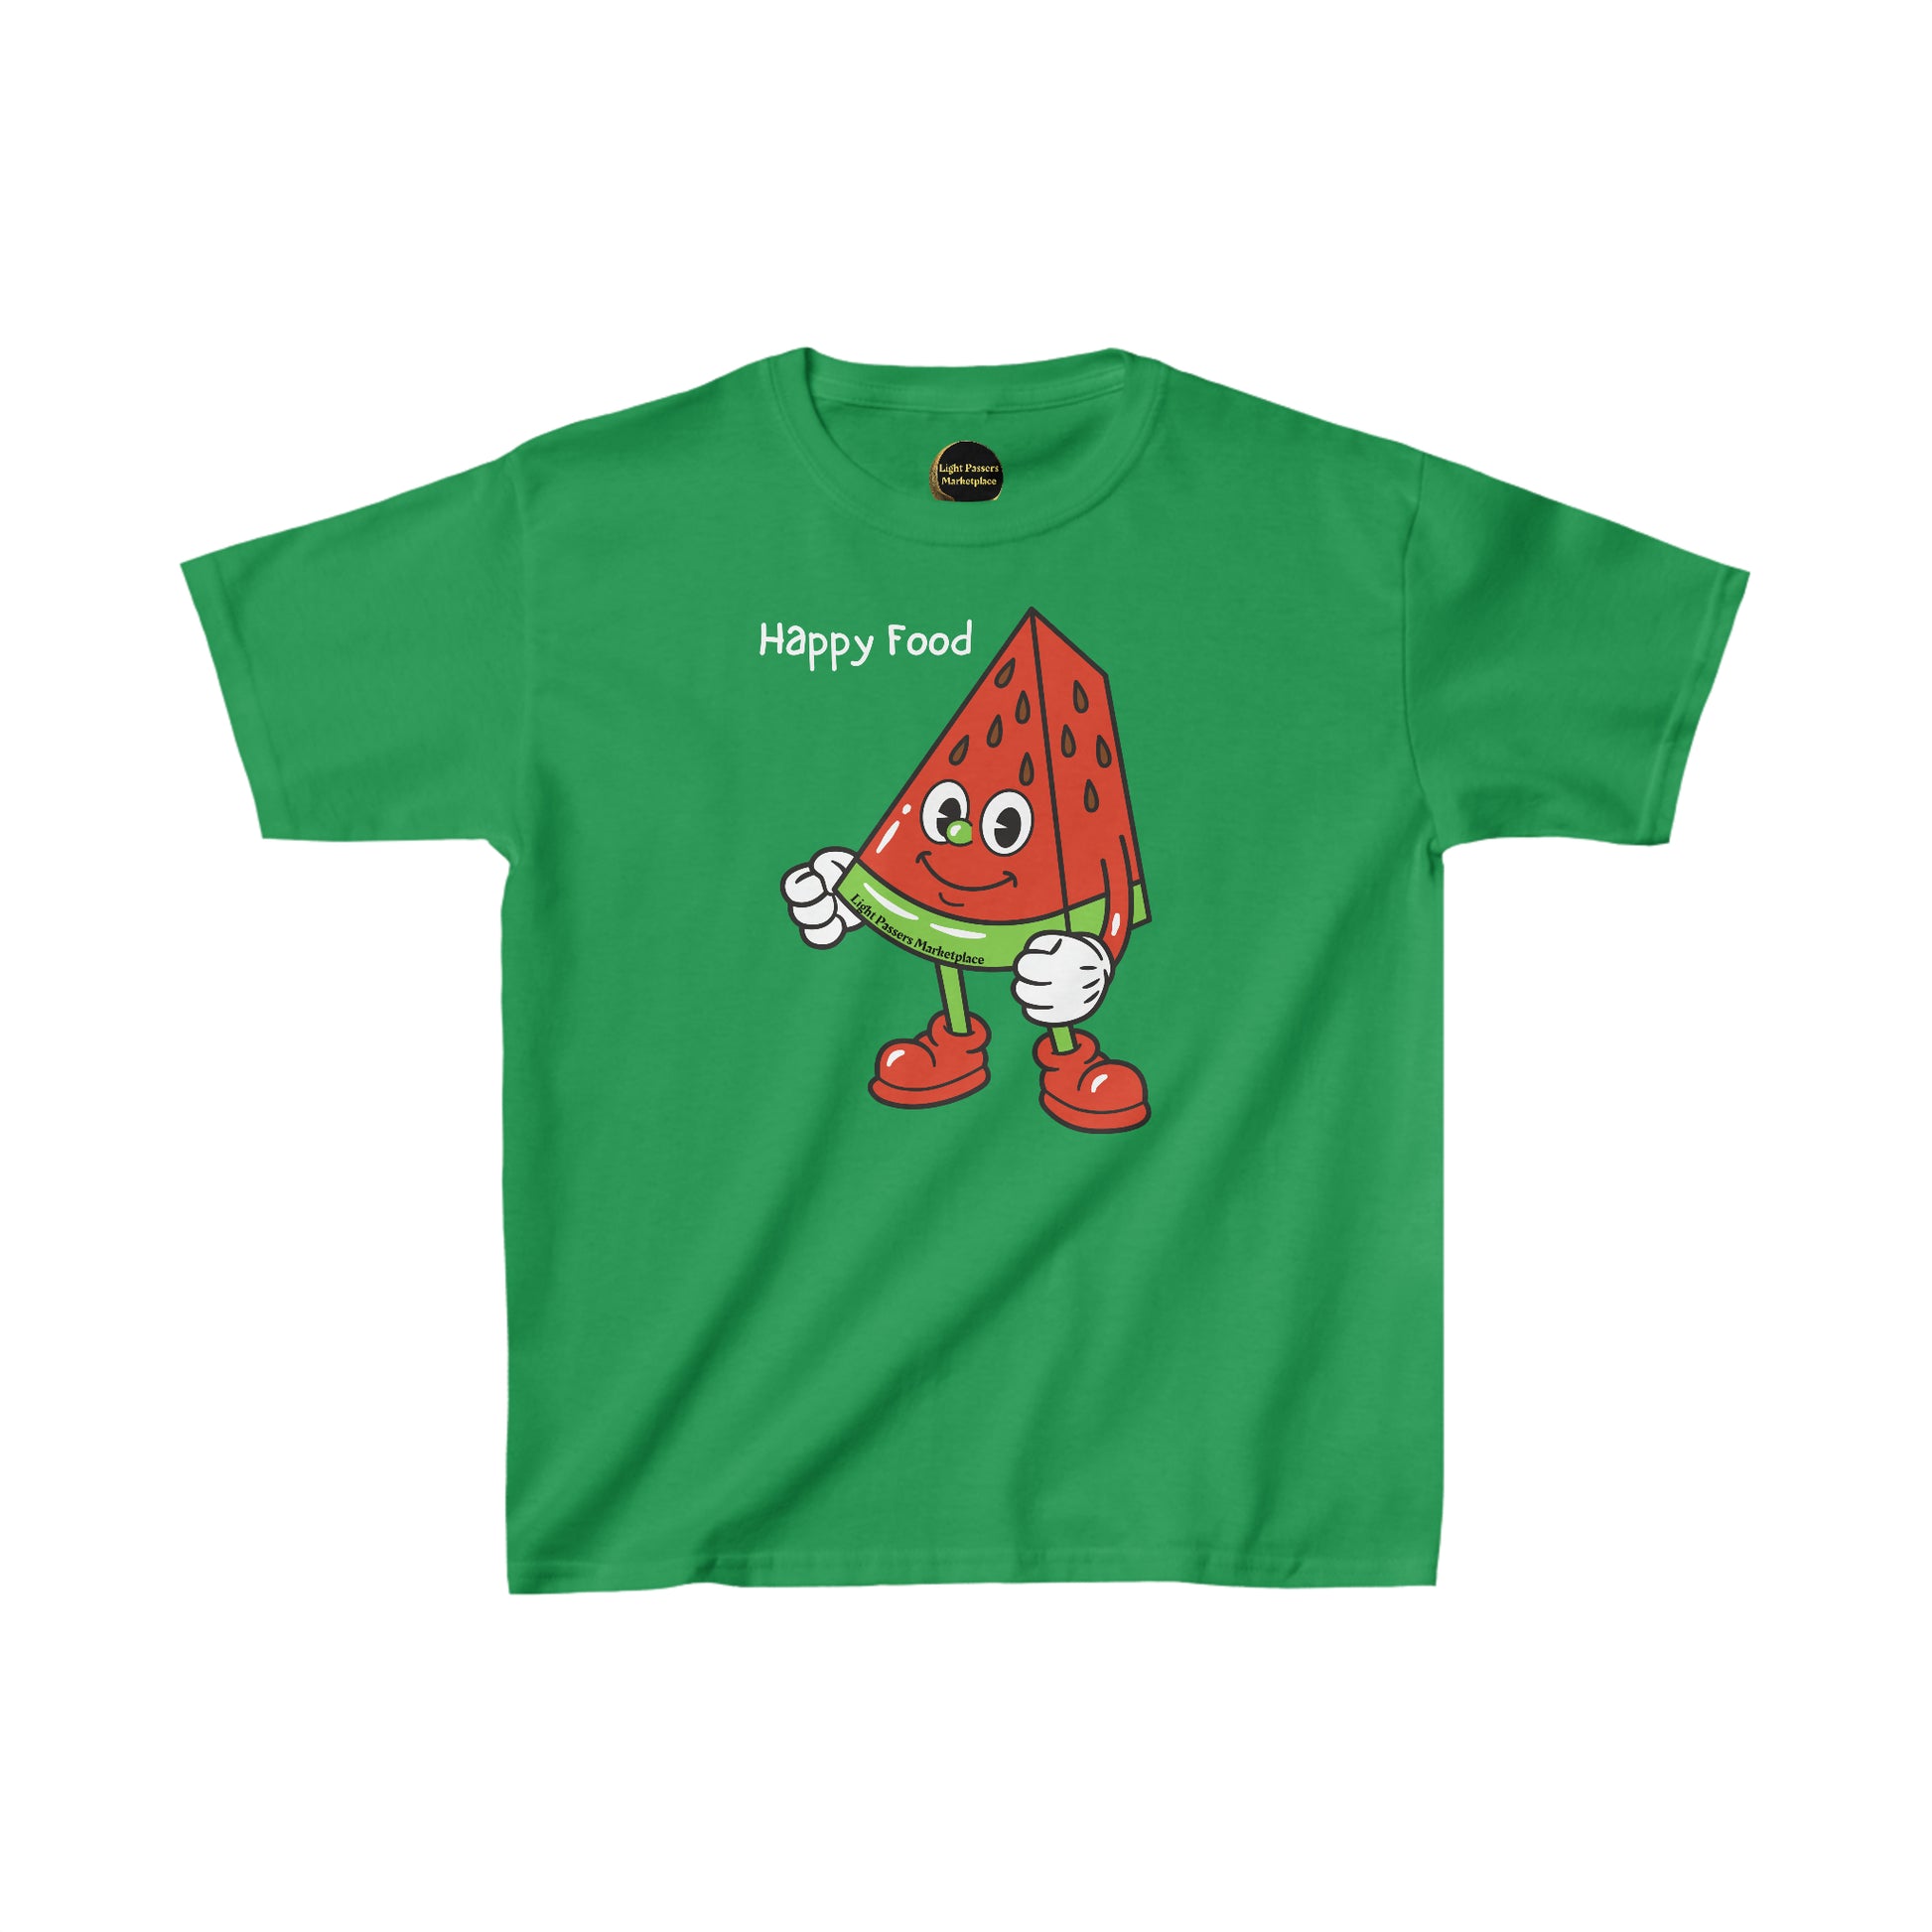 Youth T-shirt featuring a cartoon watermelon character on a green shirt. Made of 100% cotton with twill tape shoulders for durability. Ethically sourced and curl-resistant collar for comfort.